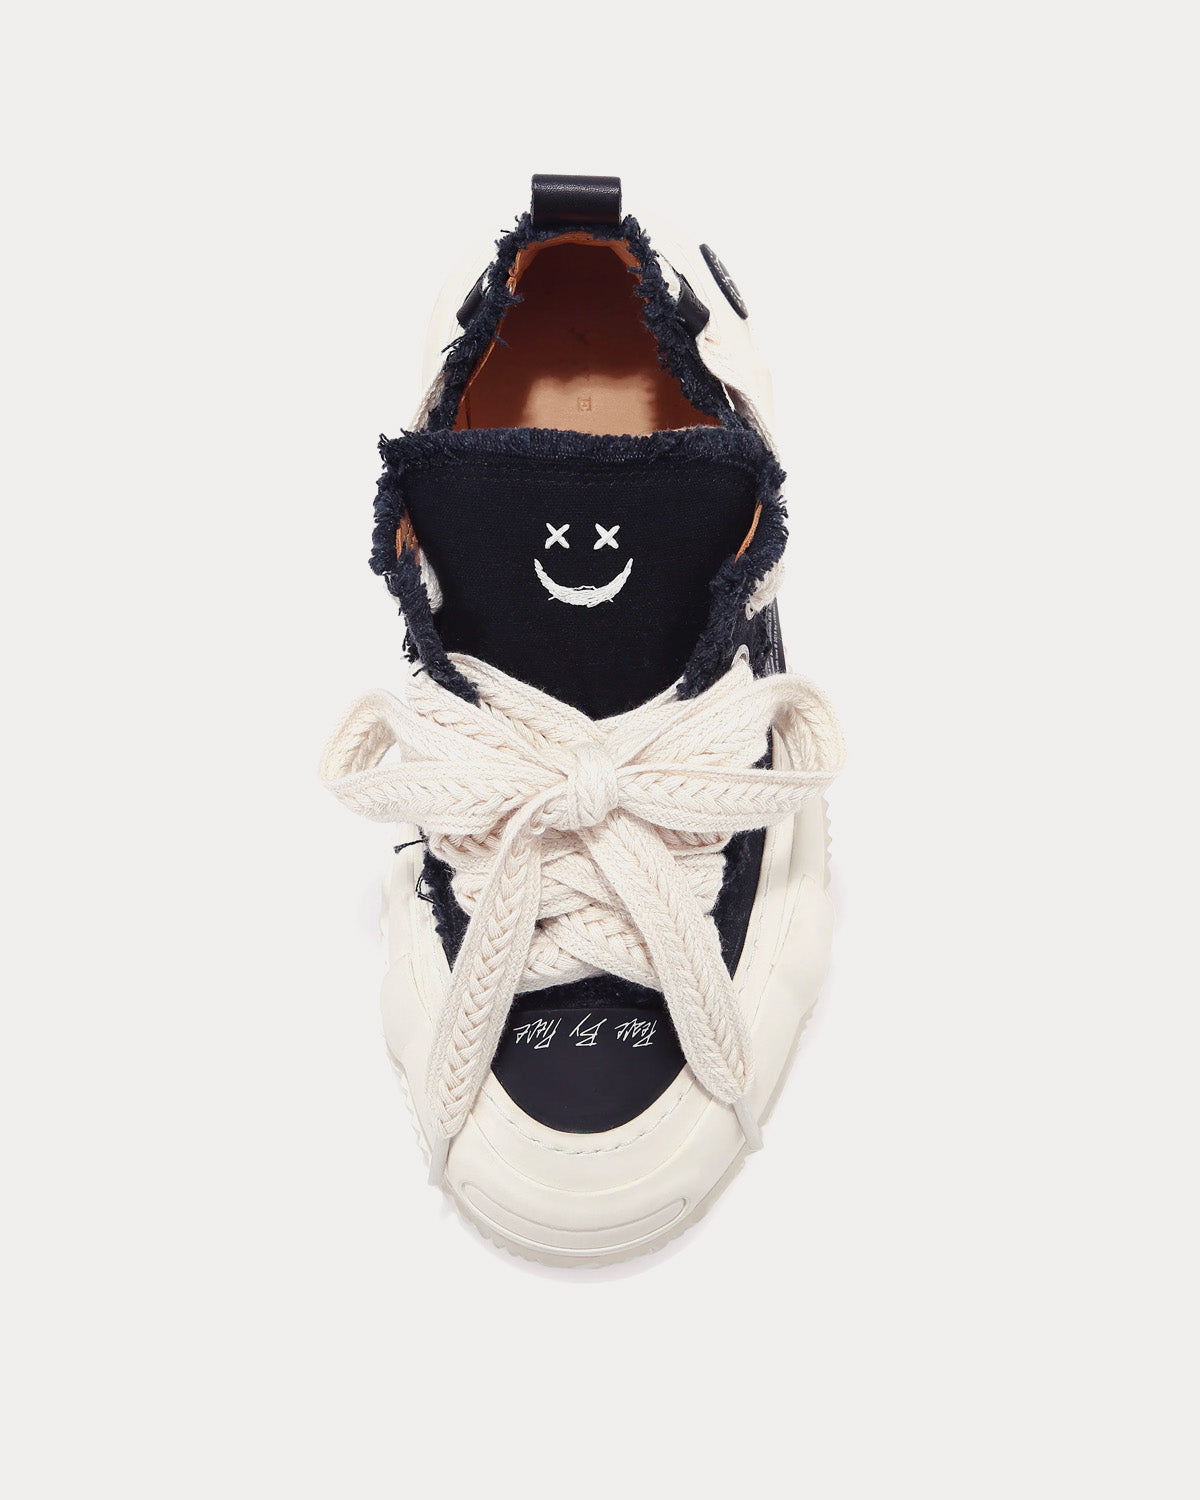 xVESSEL - G.O.P. 2.0 Marshmallow Black / White Low Top Sneakers